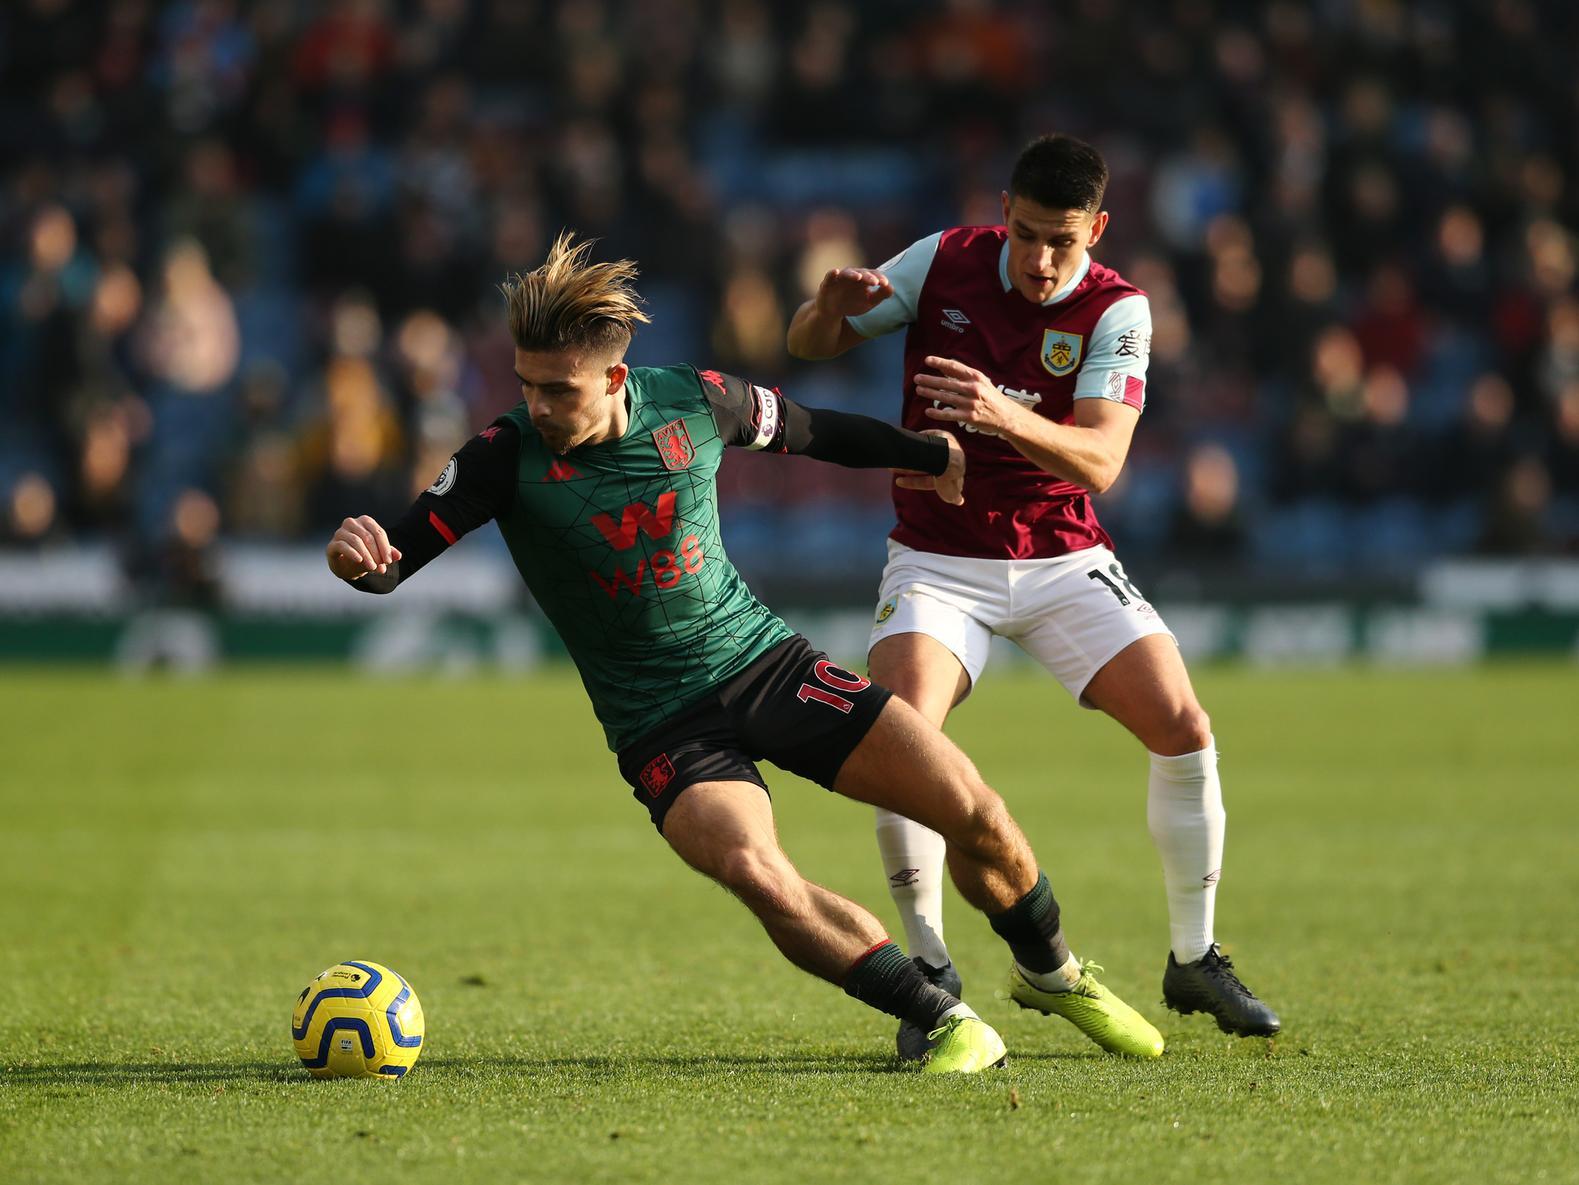 The midfielder has been one of the first names on the team sheet ever since breaking in to the starting XI. Westwood, who has played 92 times for the Clarets, was voted last season's Player of the Year.